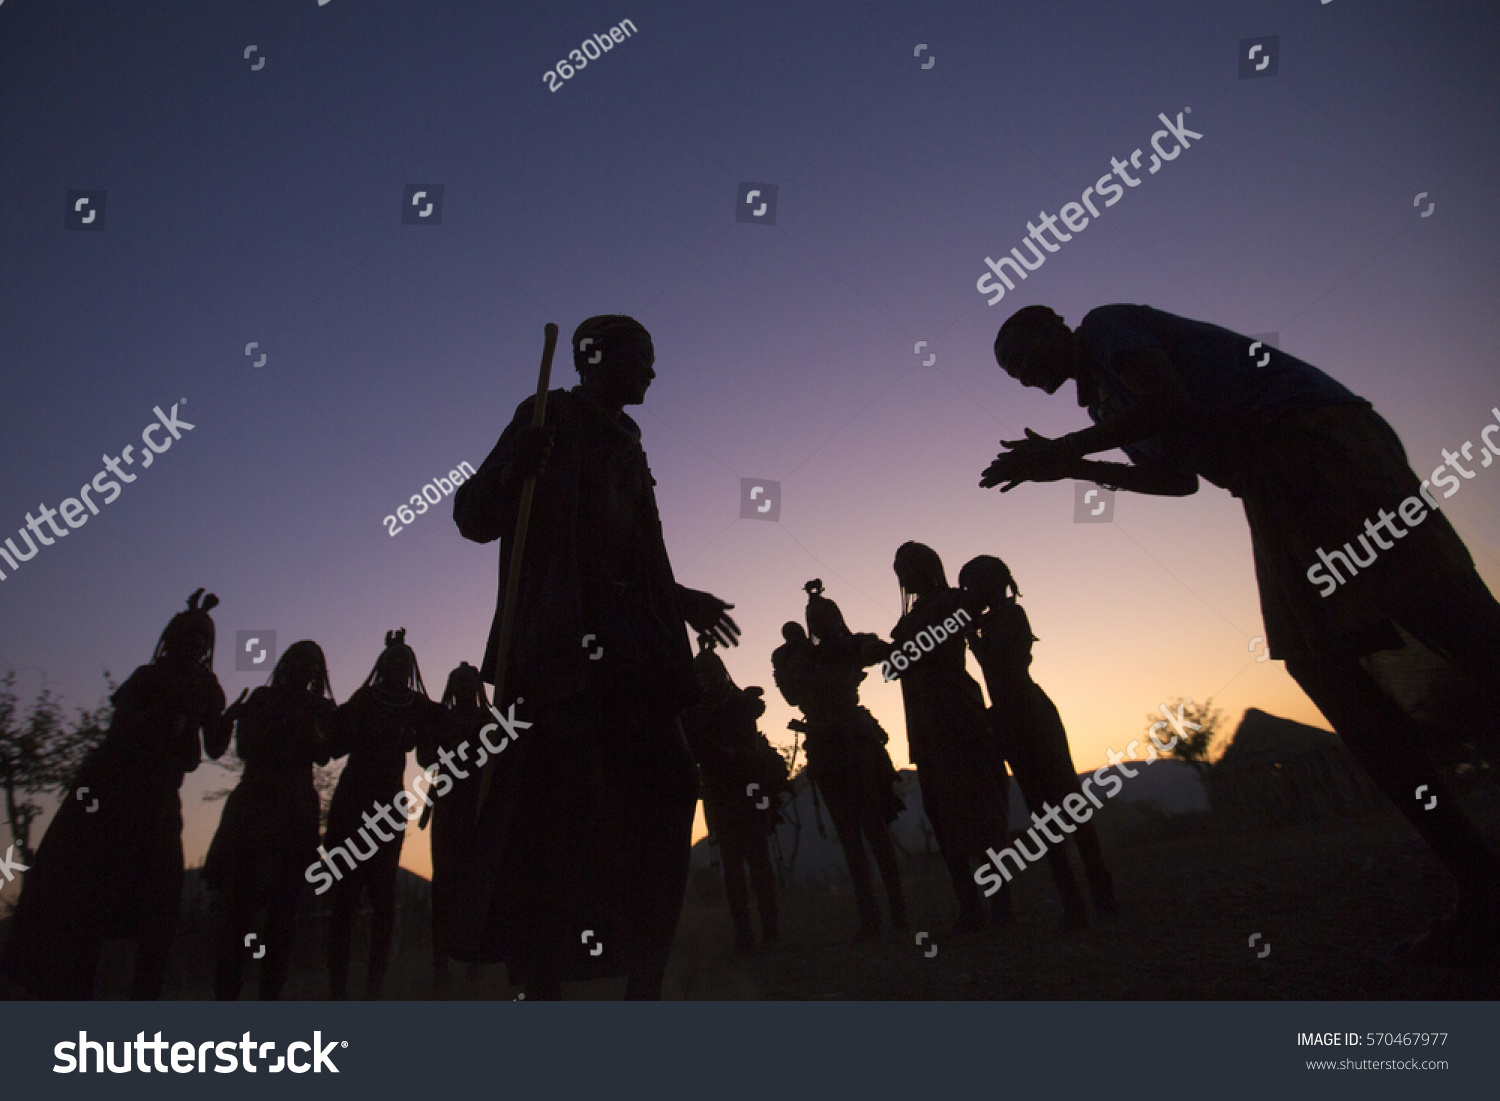 EPUPA, NAMIBIA - CIRCA AUGUST 2016 - Himba villagers gather at dusk to perform a trditional dance. This dance allows visitor to see their culture while providing an income. #570467977